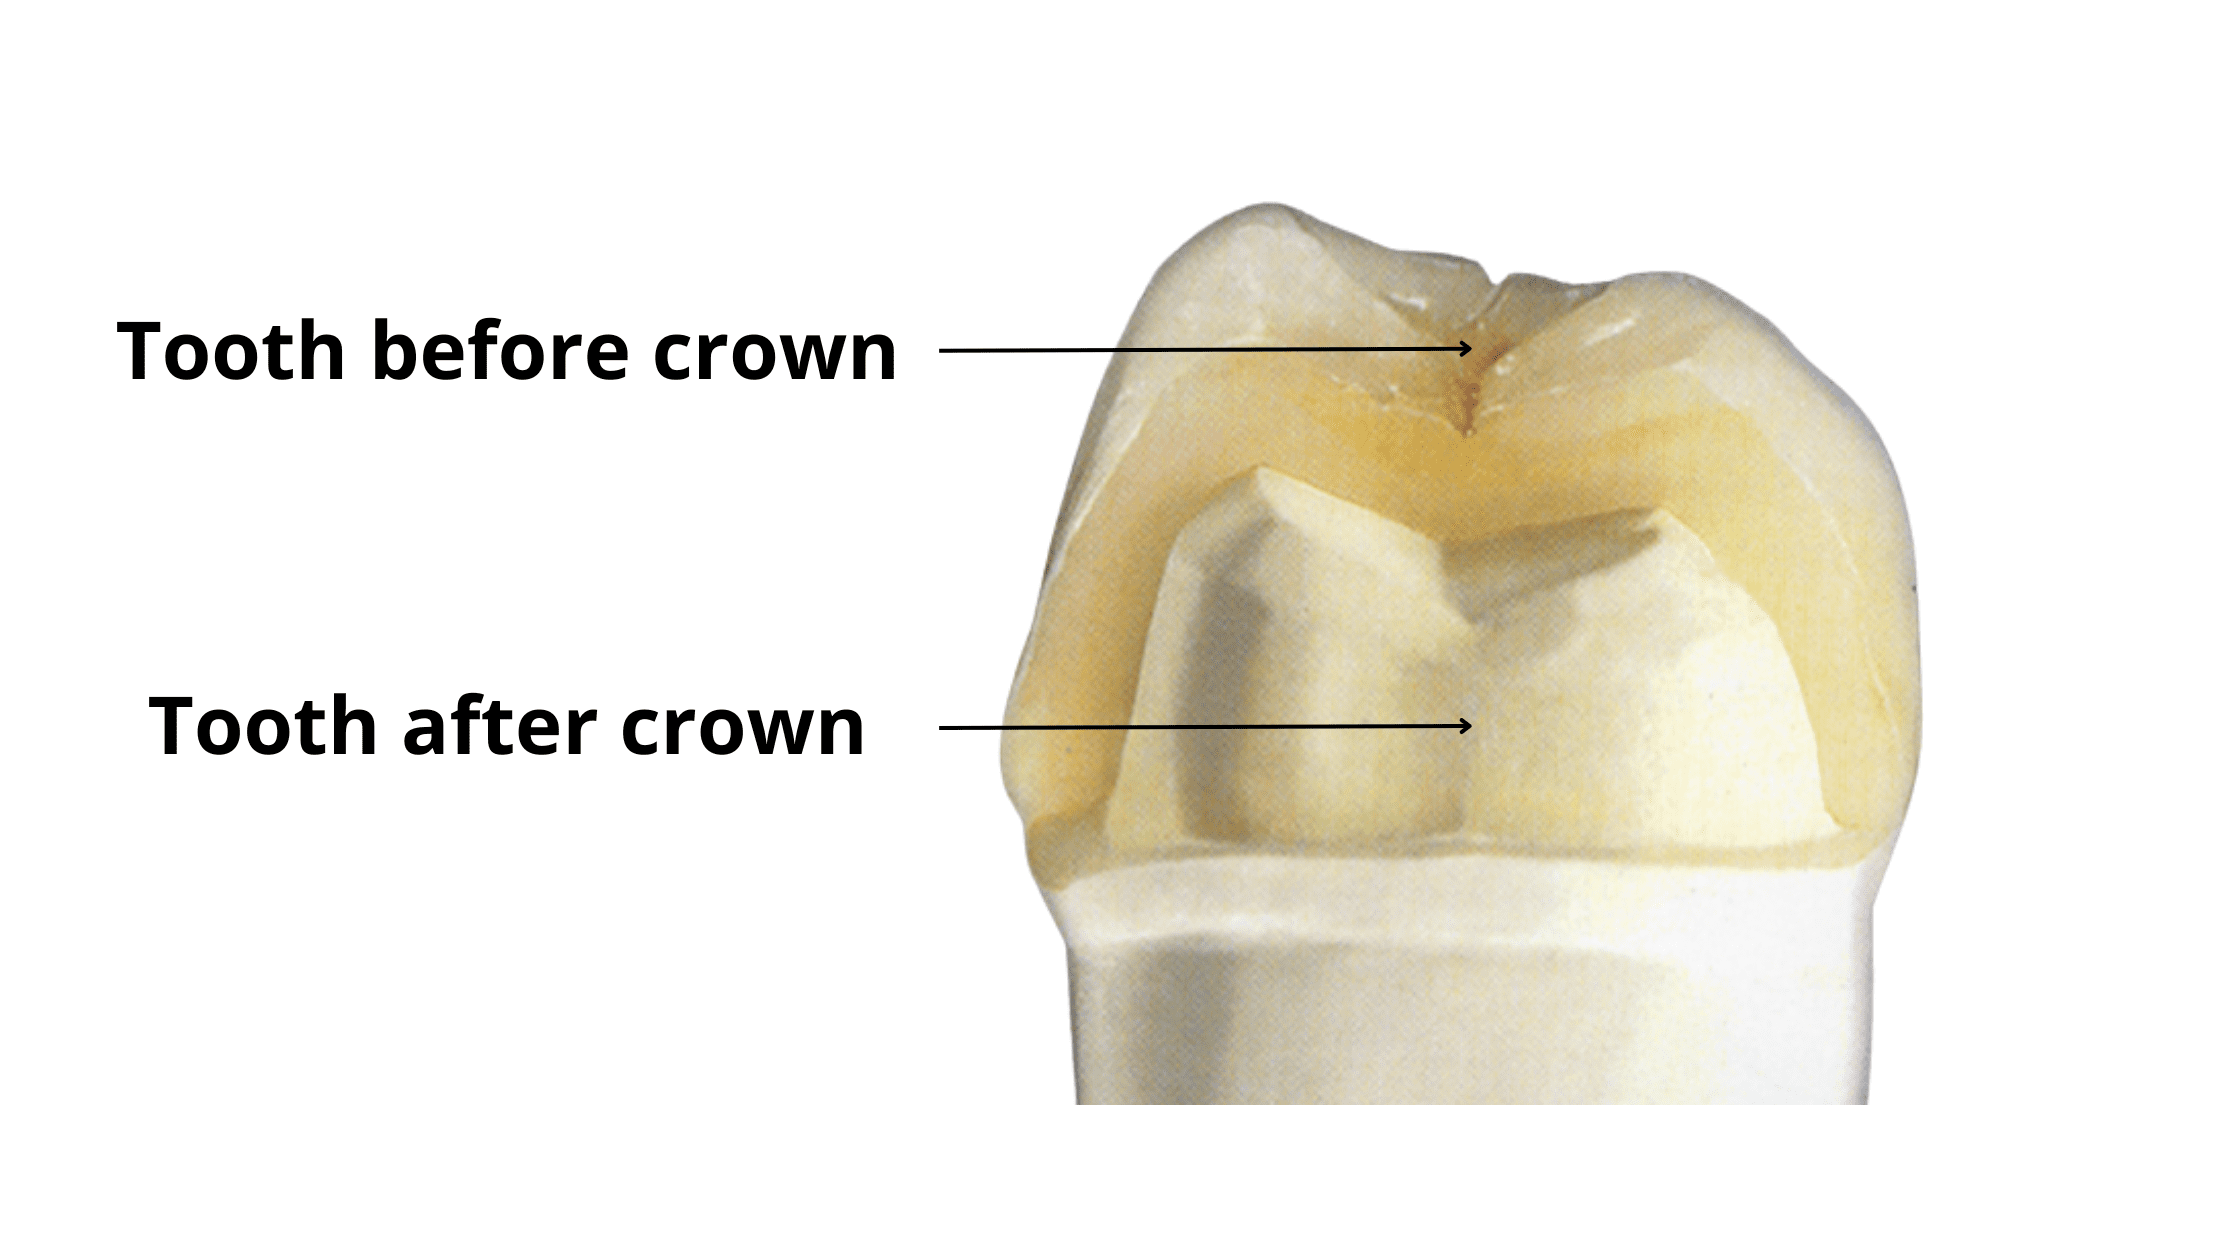 The shape of the tooth before and after a dental crown